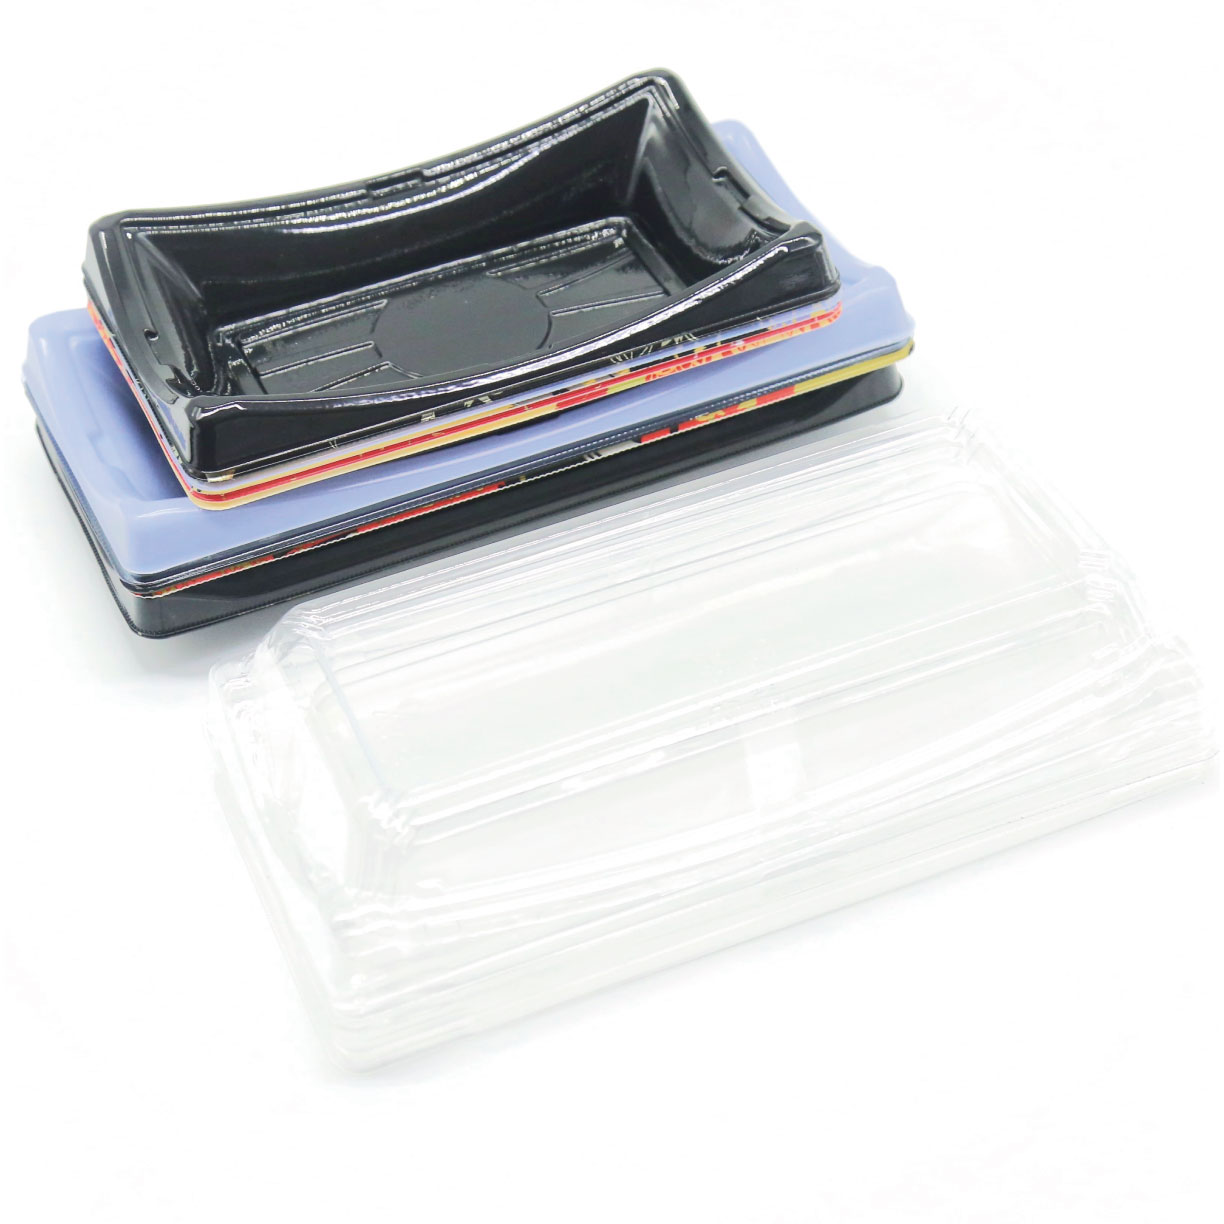 The sushi tray WL-B01 is stackable for easy storage and placement.